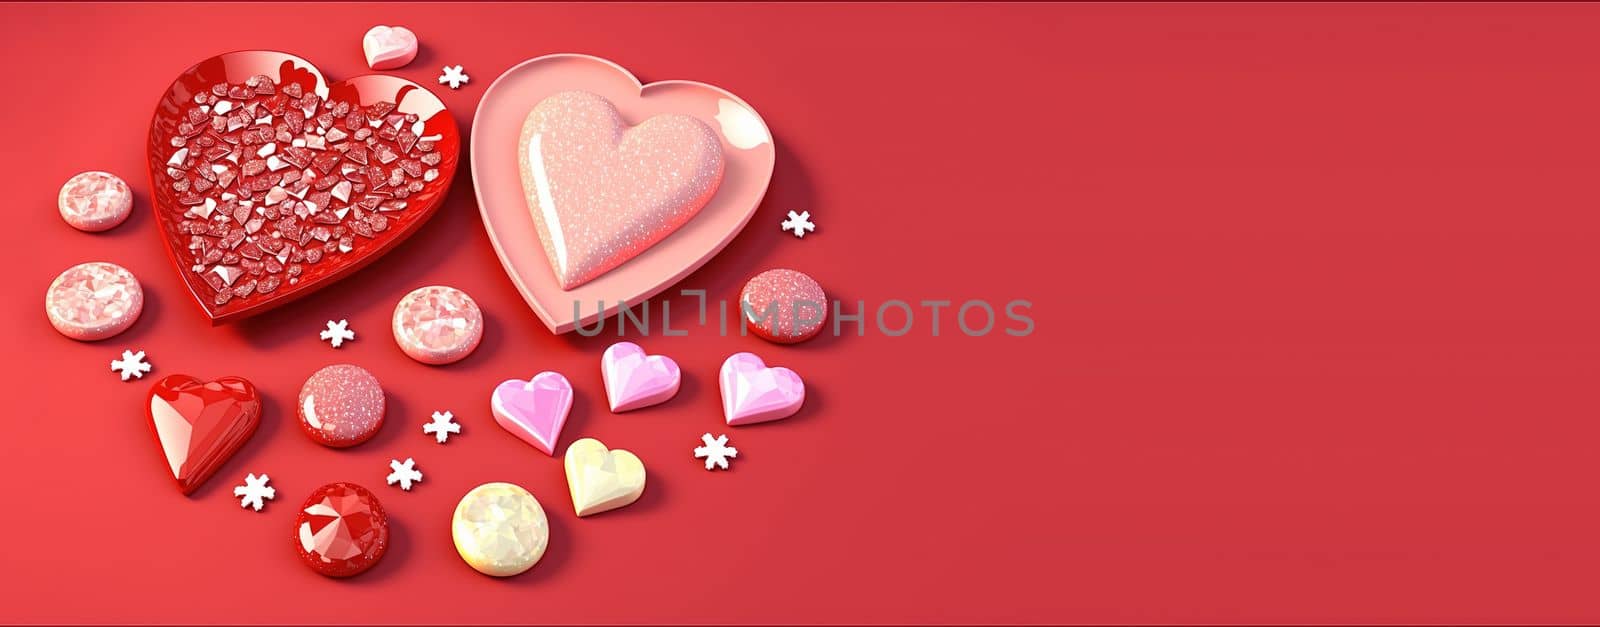 Valentine's Day 3D Heart Illustration and Diamond Crystal Theme Banner and Background by templator